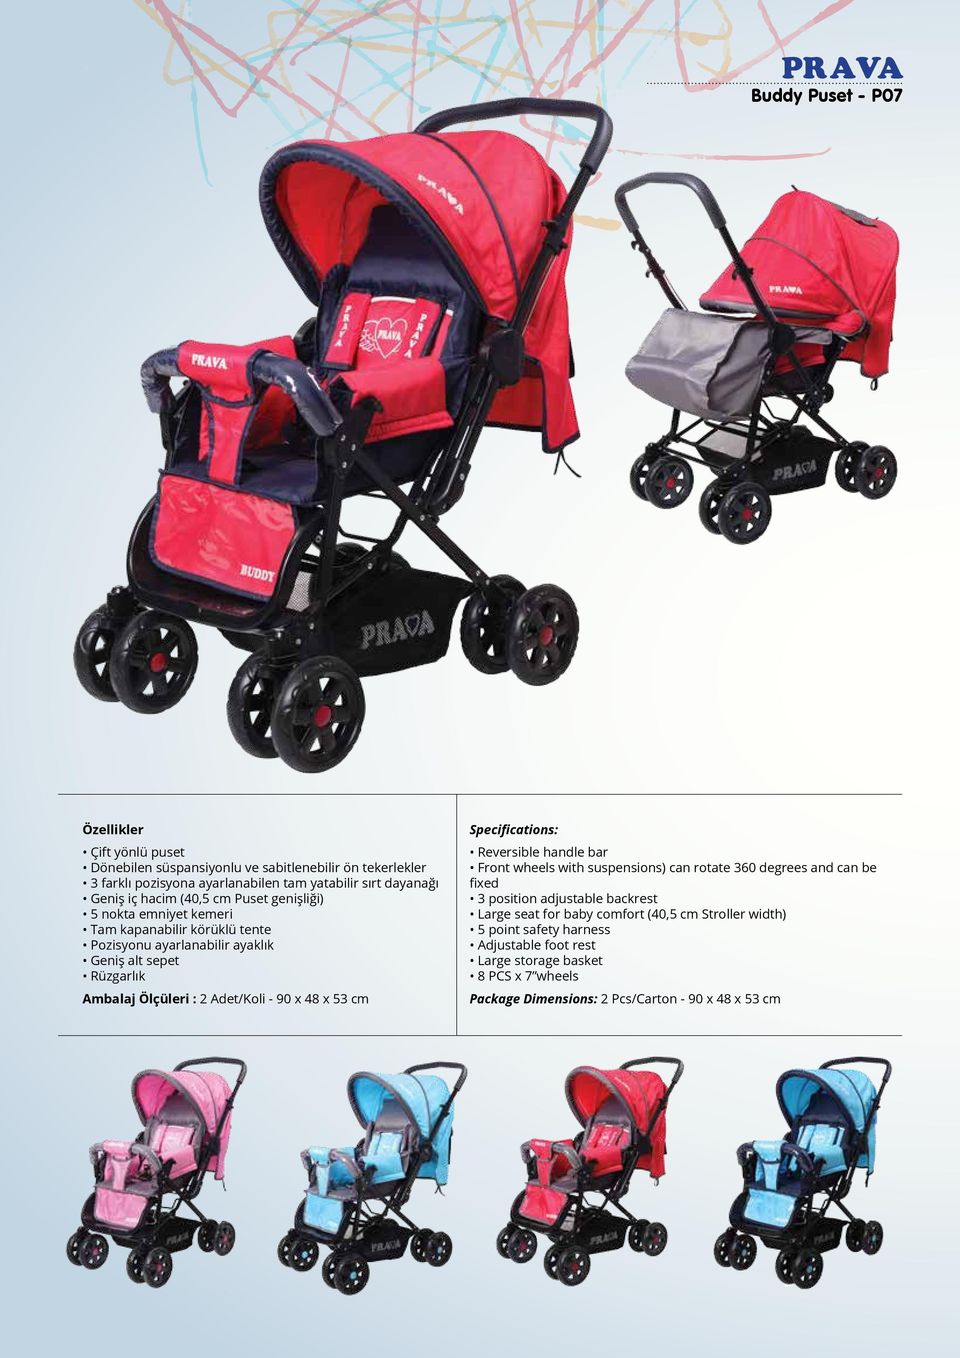 bar Front wheels with suspensions) can rotate 360 degrees and can be fixed 3 position adjustable backrest Large seat for baby comfort (40,5 cm Stroller